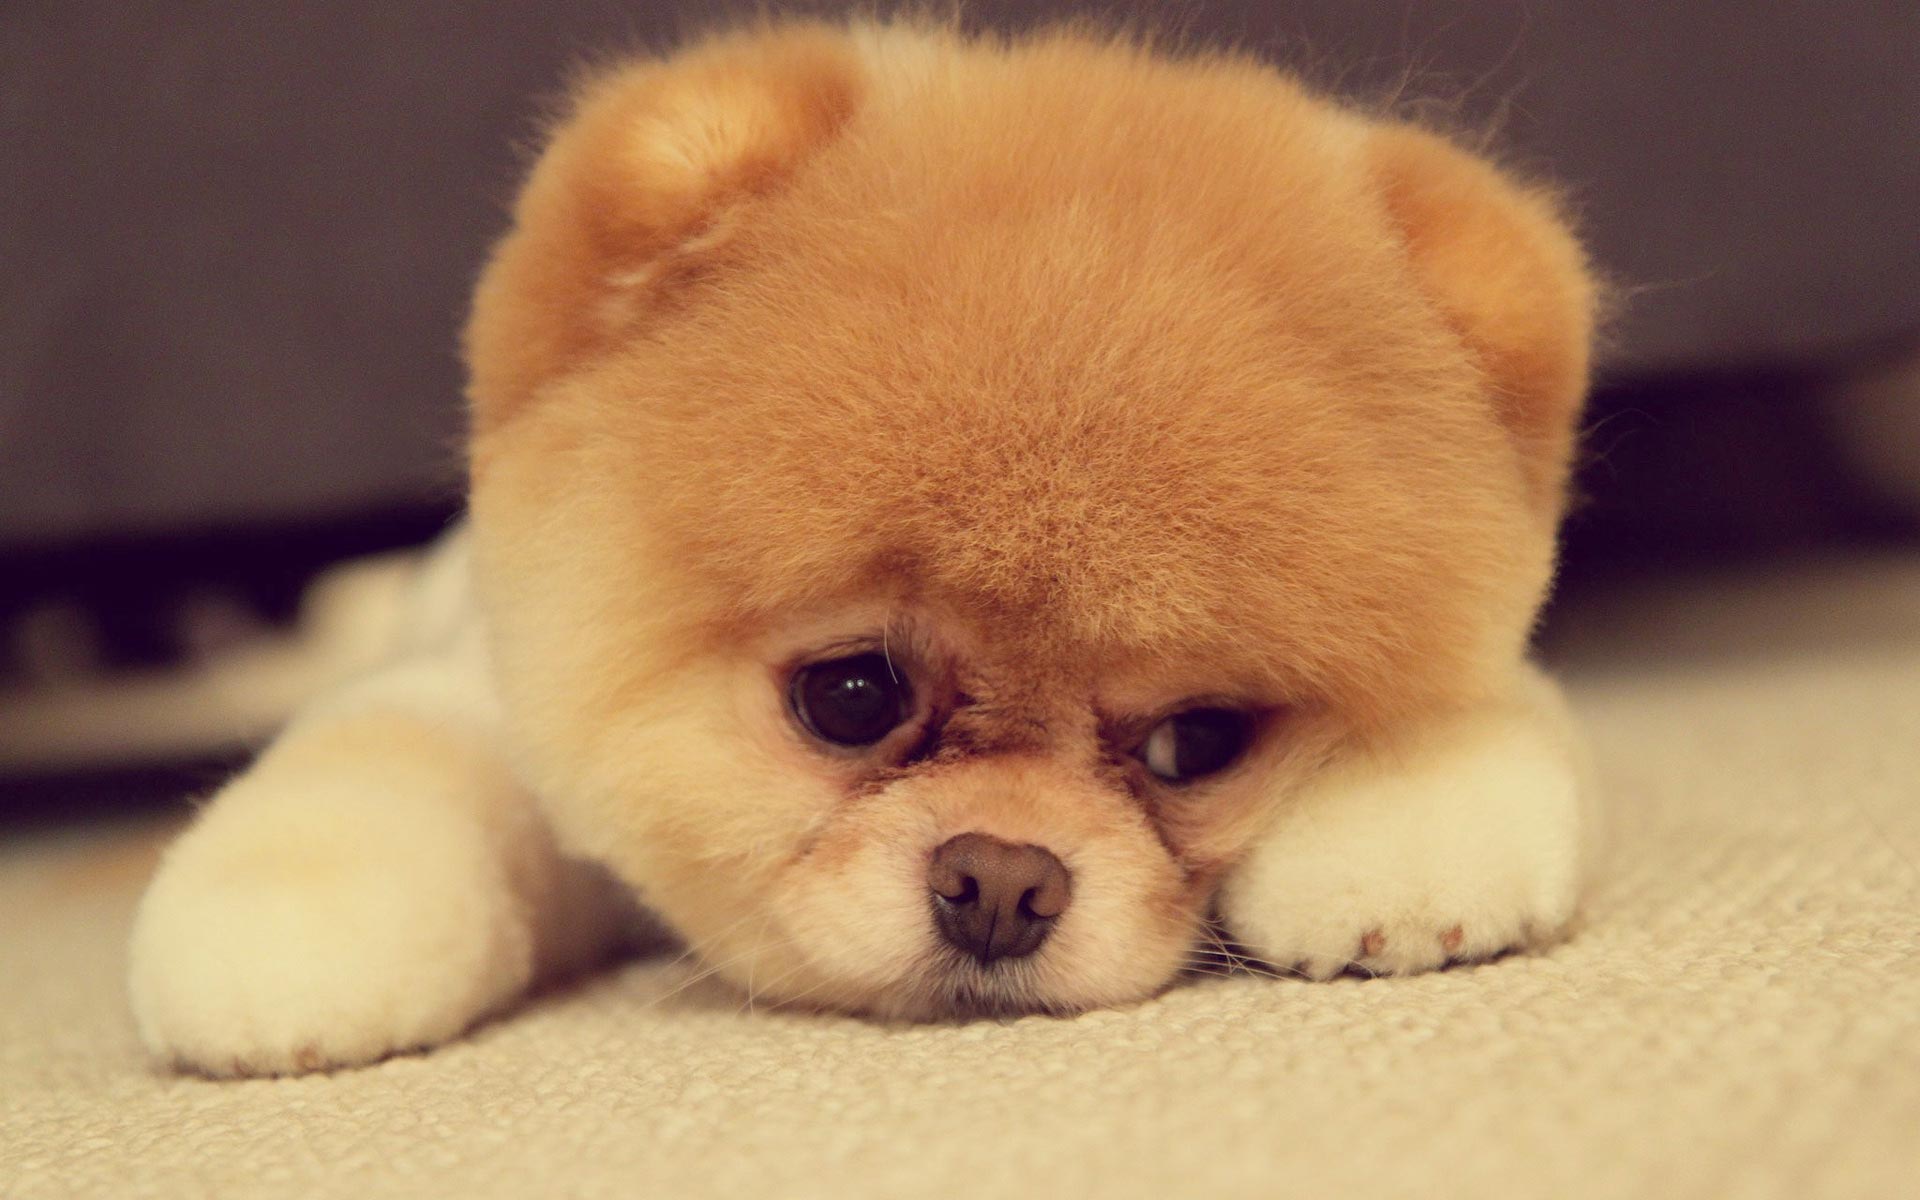 Top 5 Most Cute Puppy Breeds - Kool wallpapers